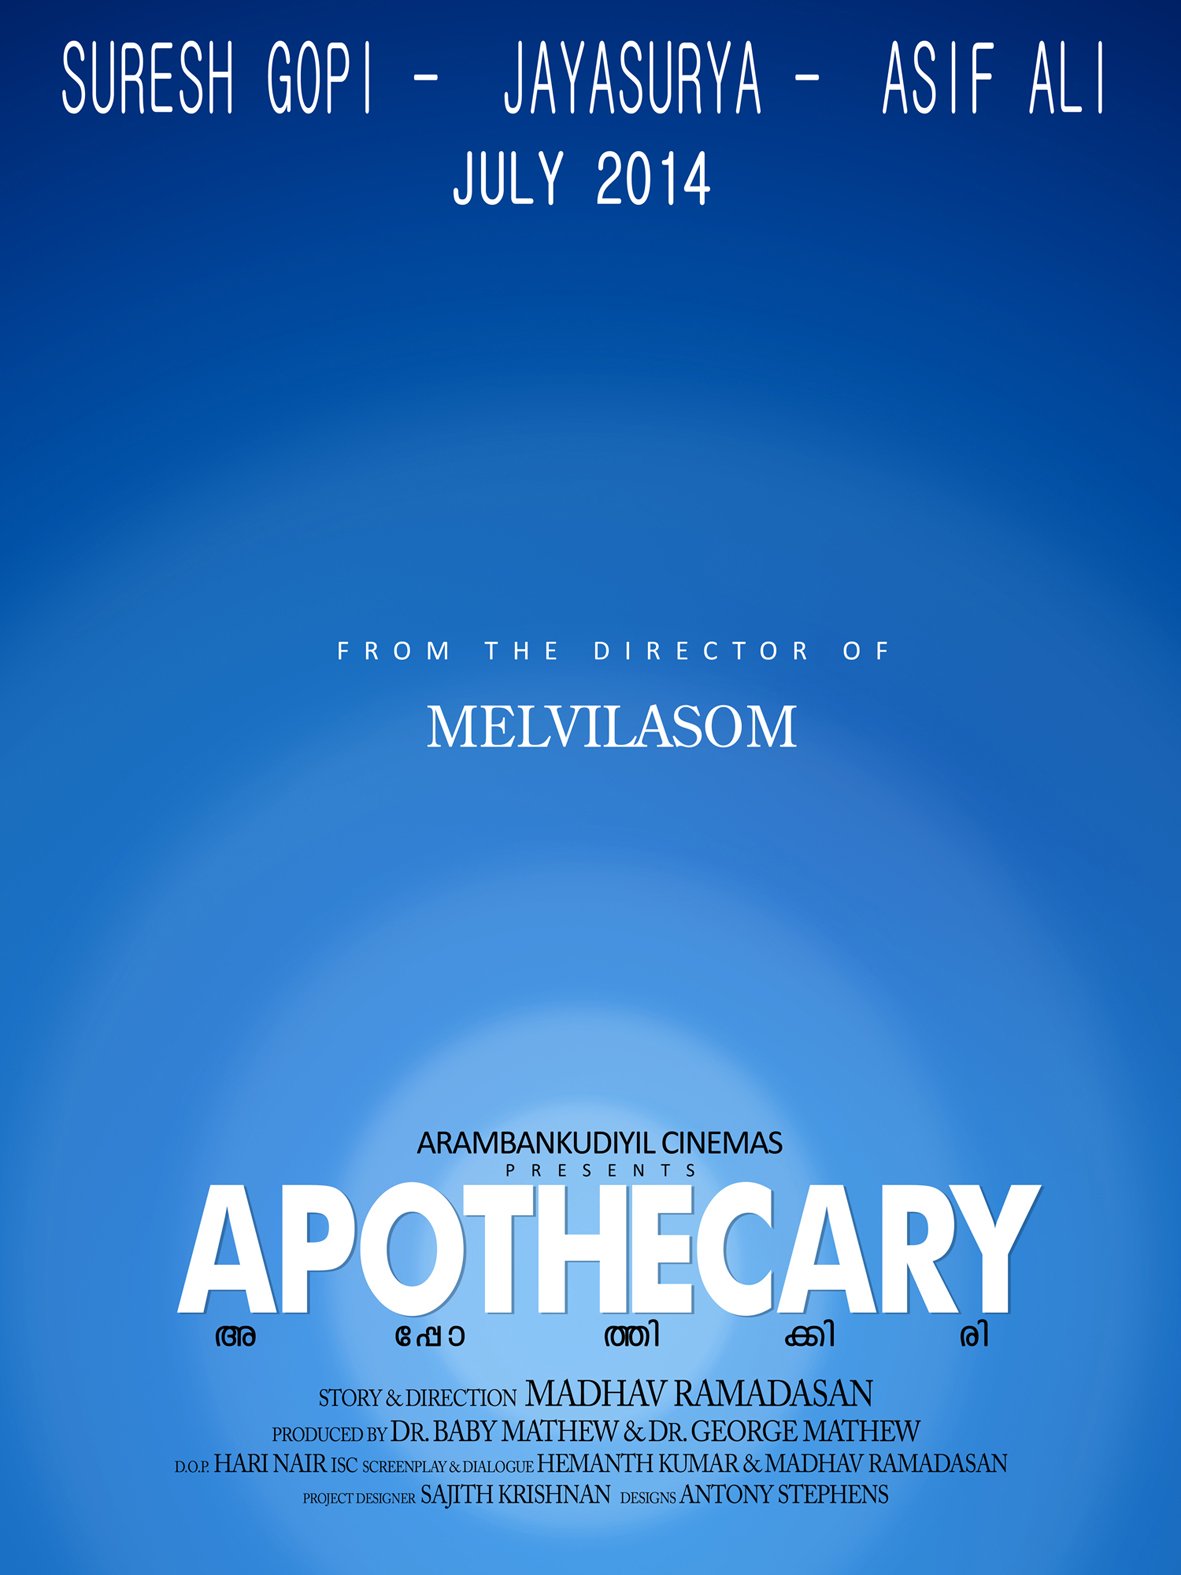 Malayalam poster of the movie Apothecary